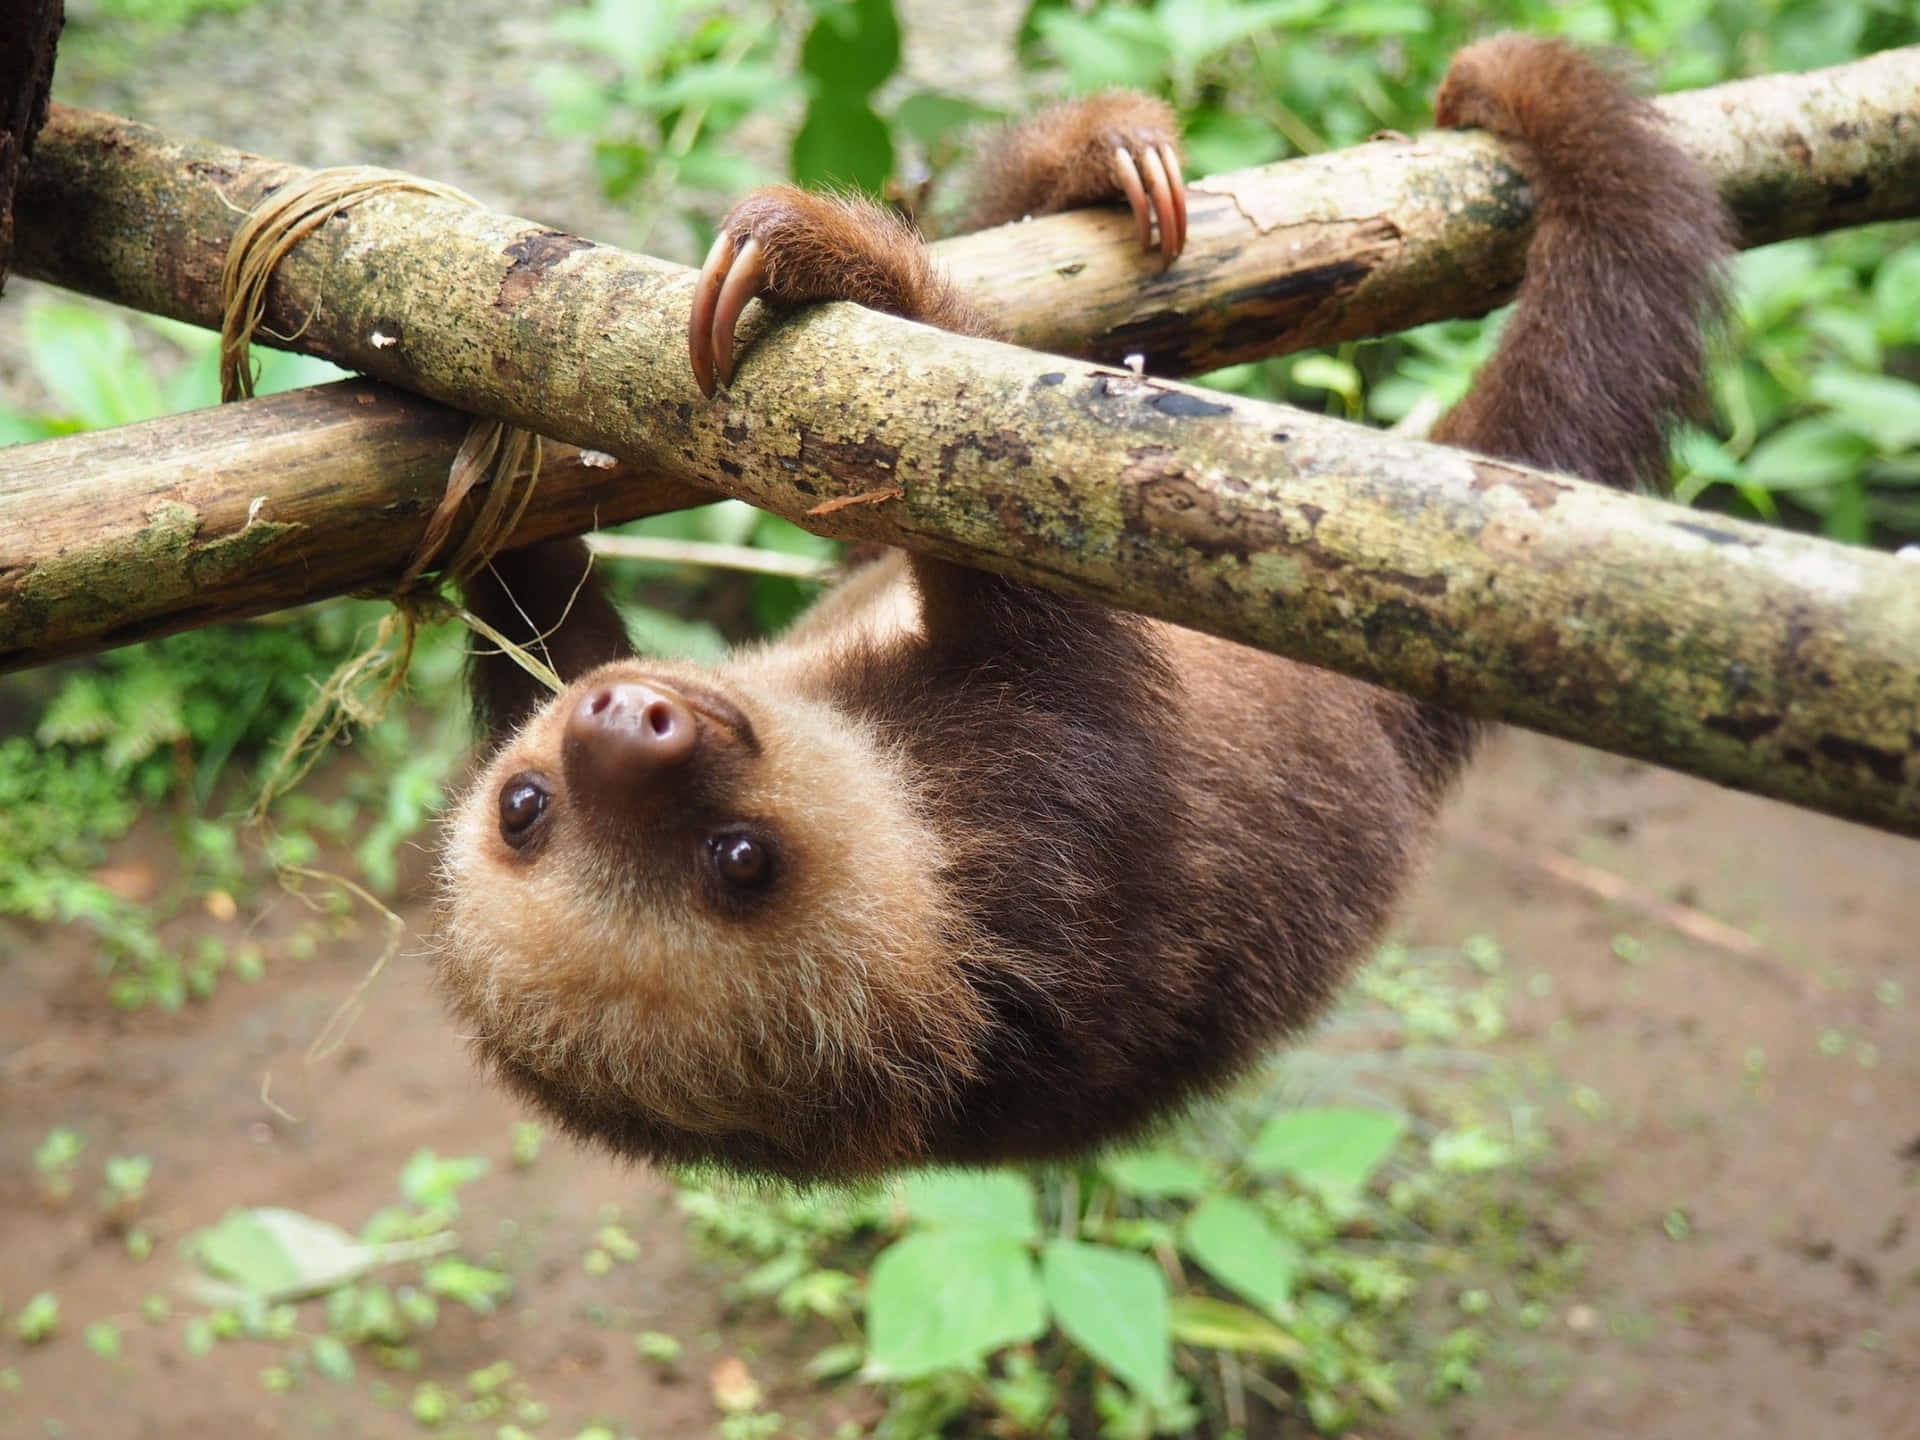 Adorable Baby Sloth Hanging Around